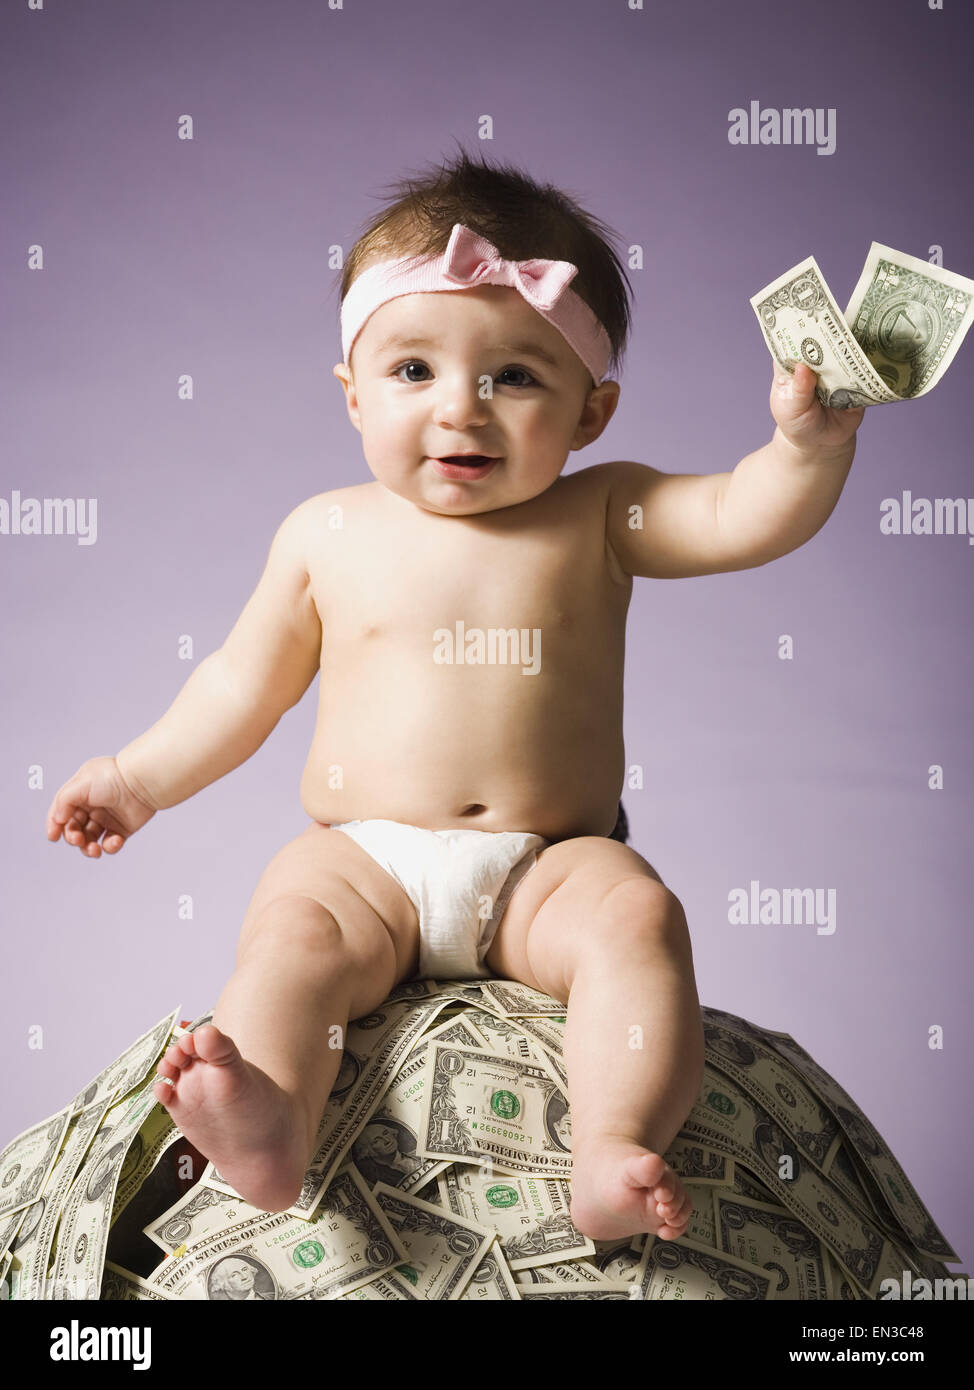 Baby girl sitting on pile of US currency Stock Photo